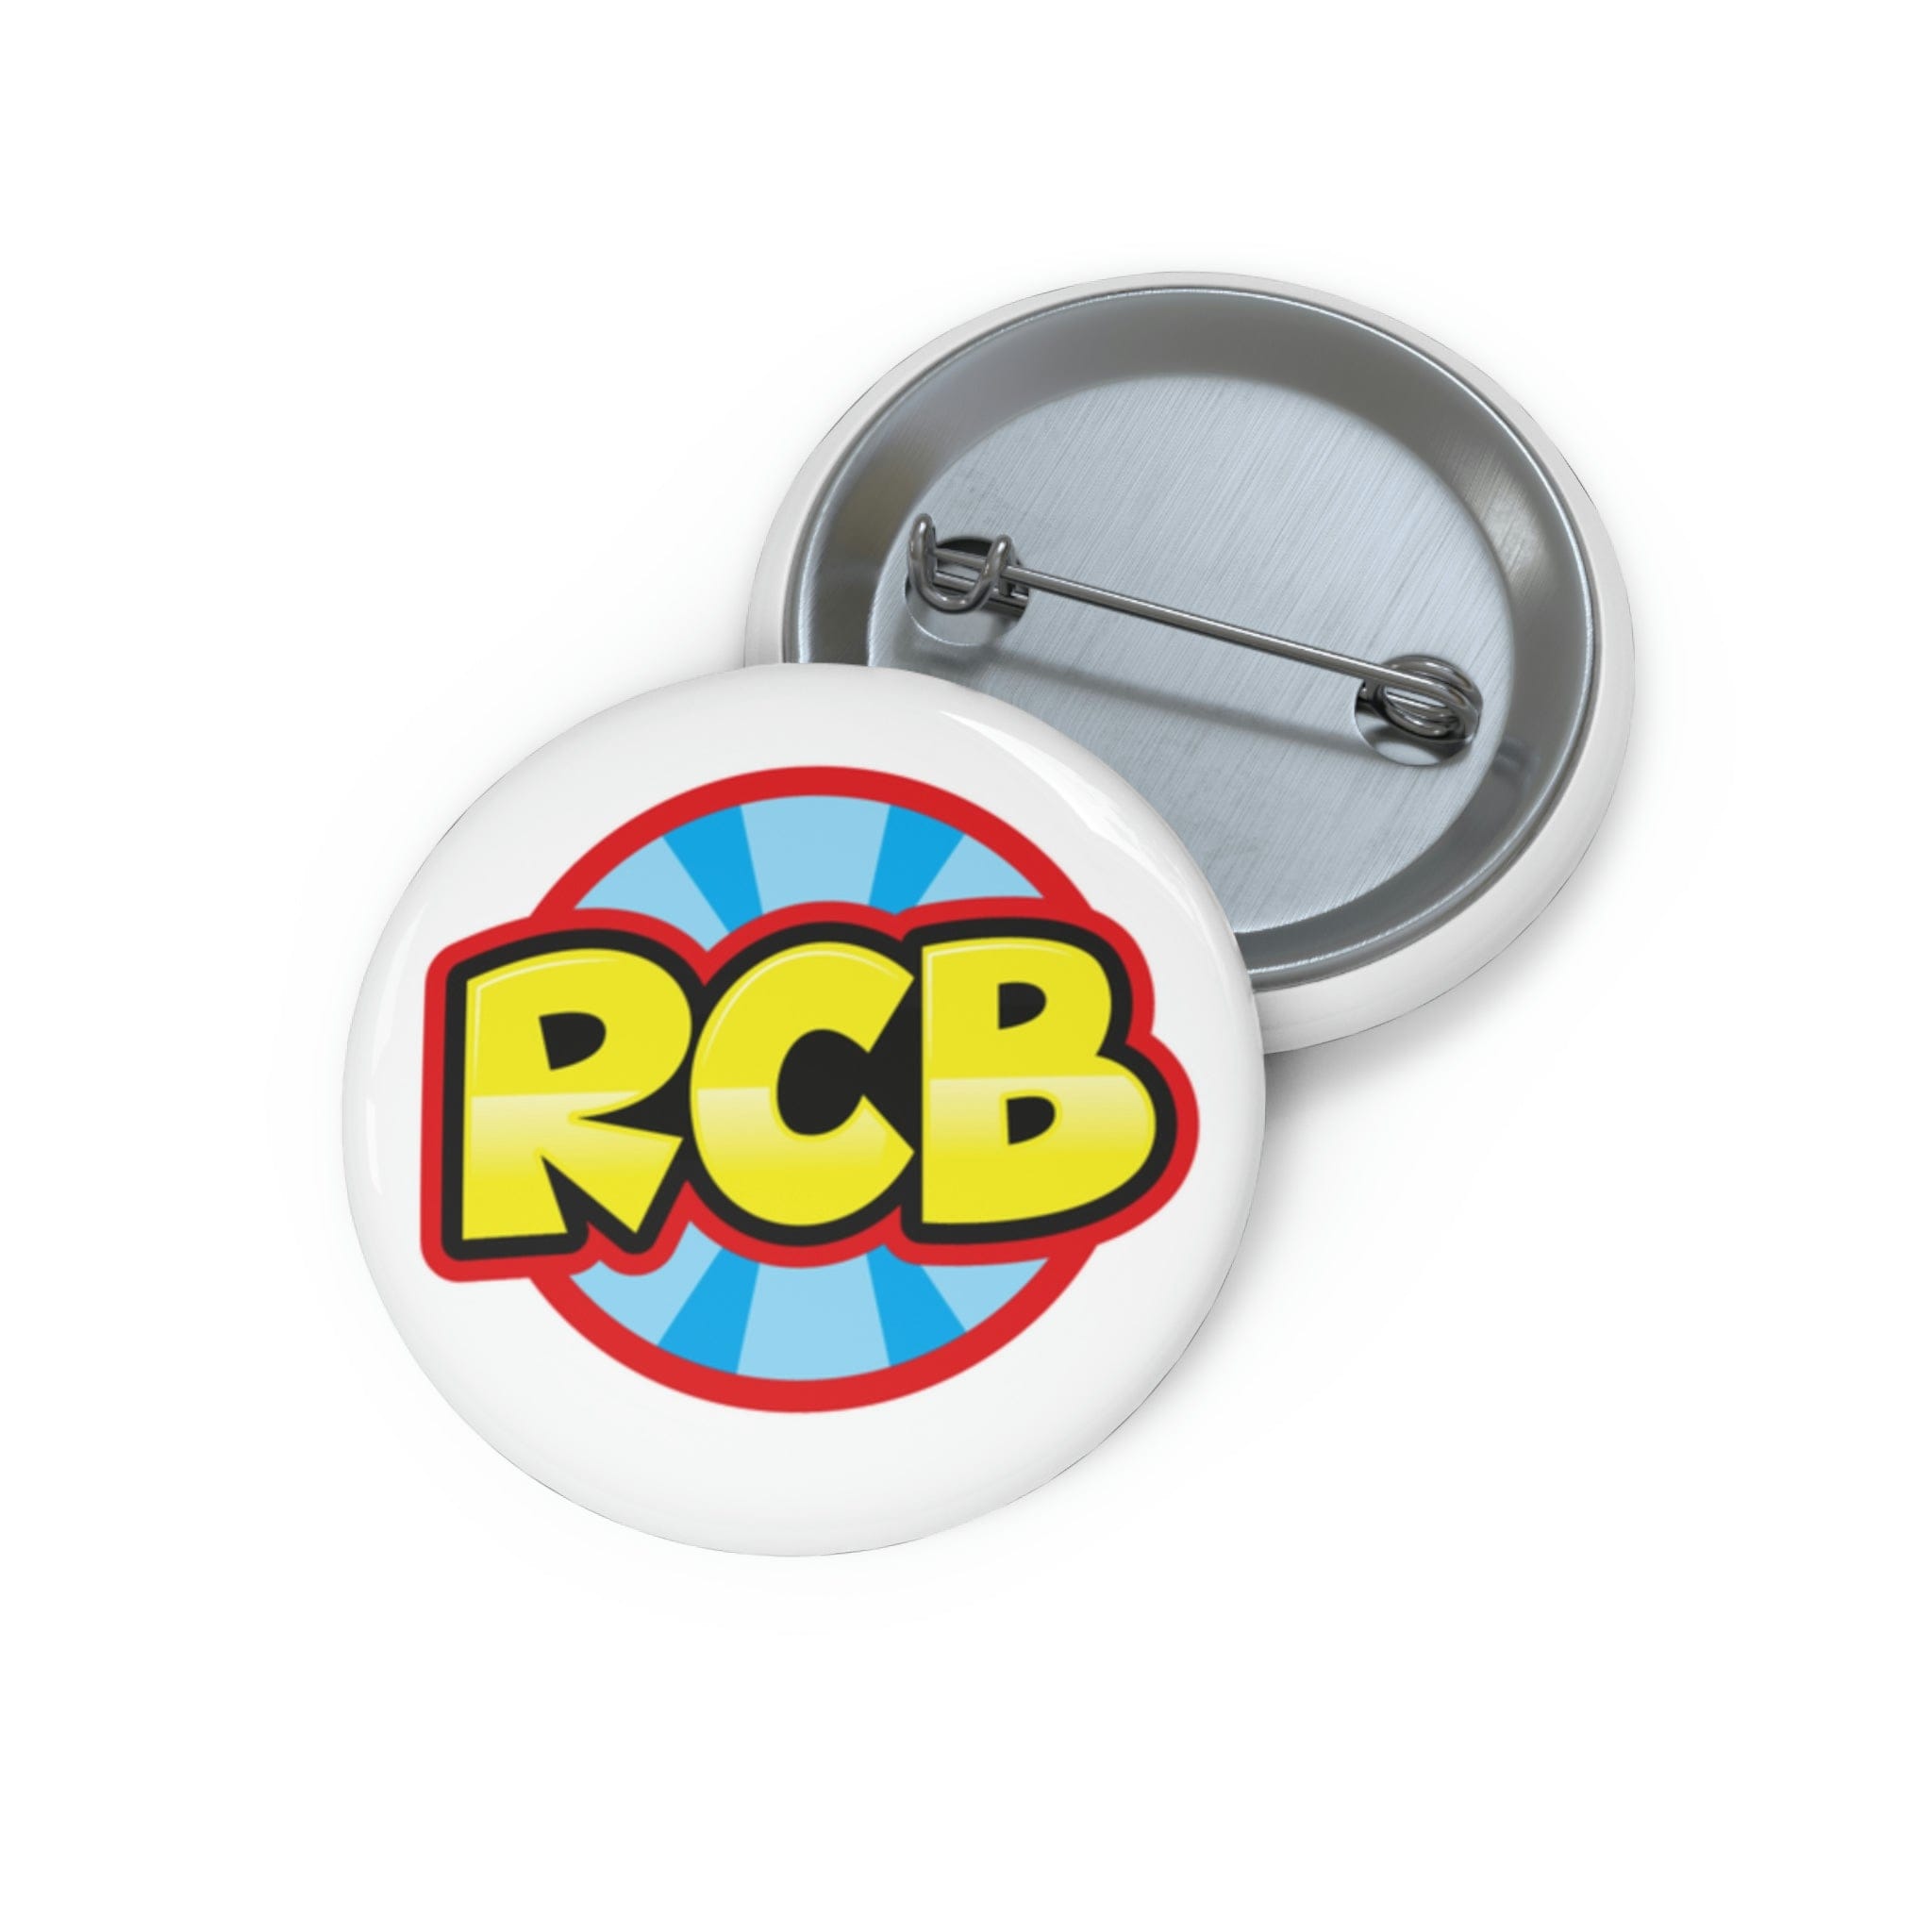 RCB Stylish Pin Buttons